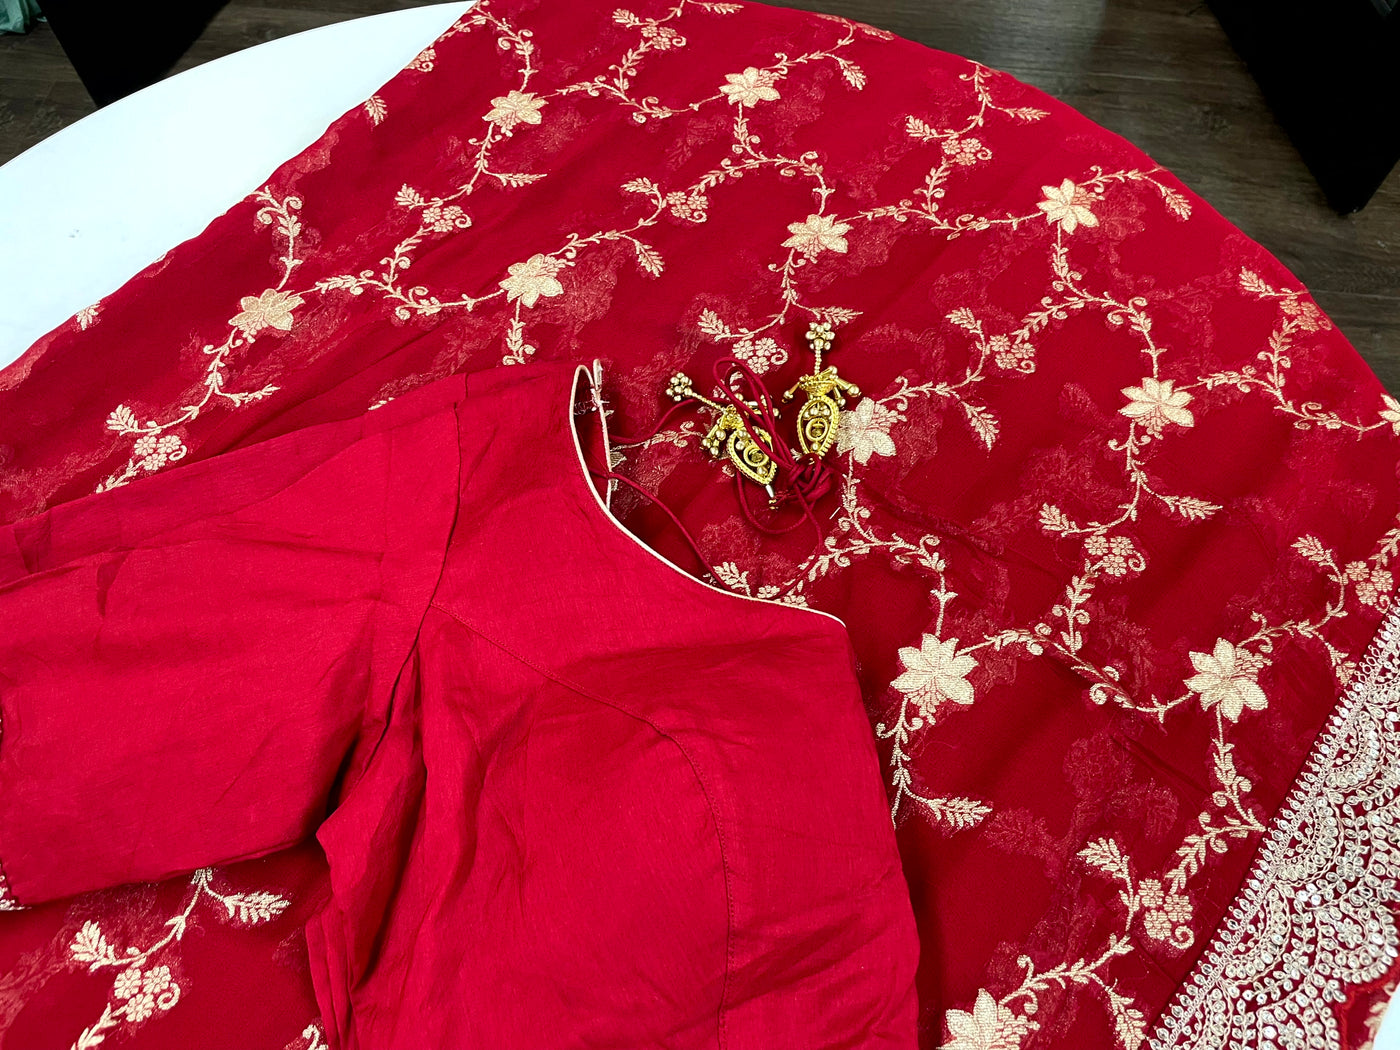 RED COLORED DESIGNER SAREE SET WITH THREAD EMBROIDERY